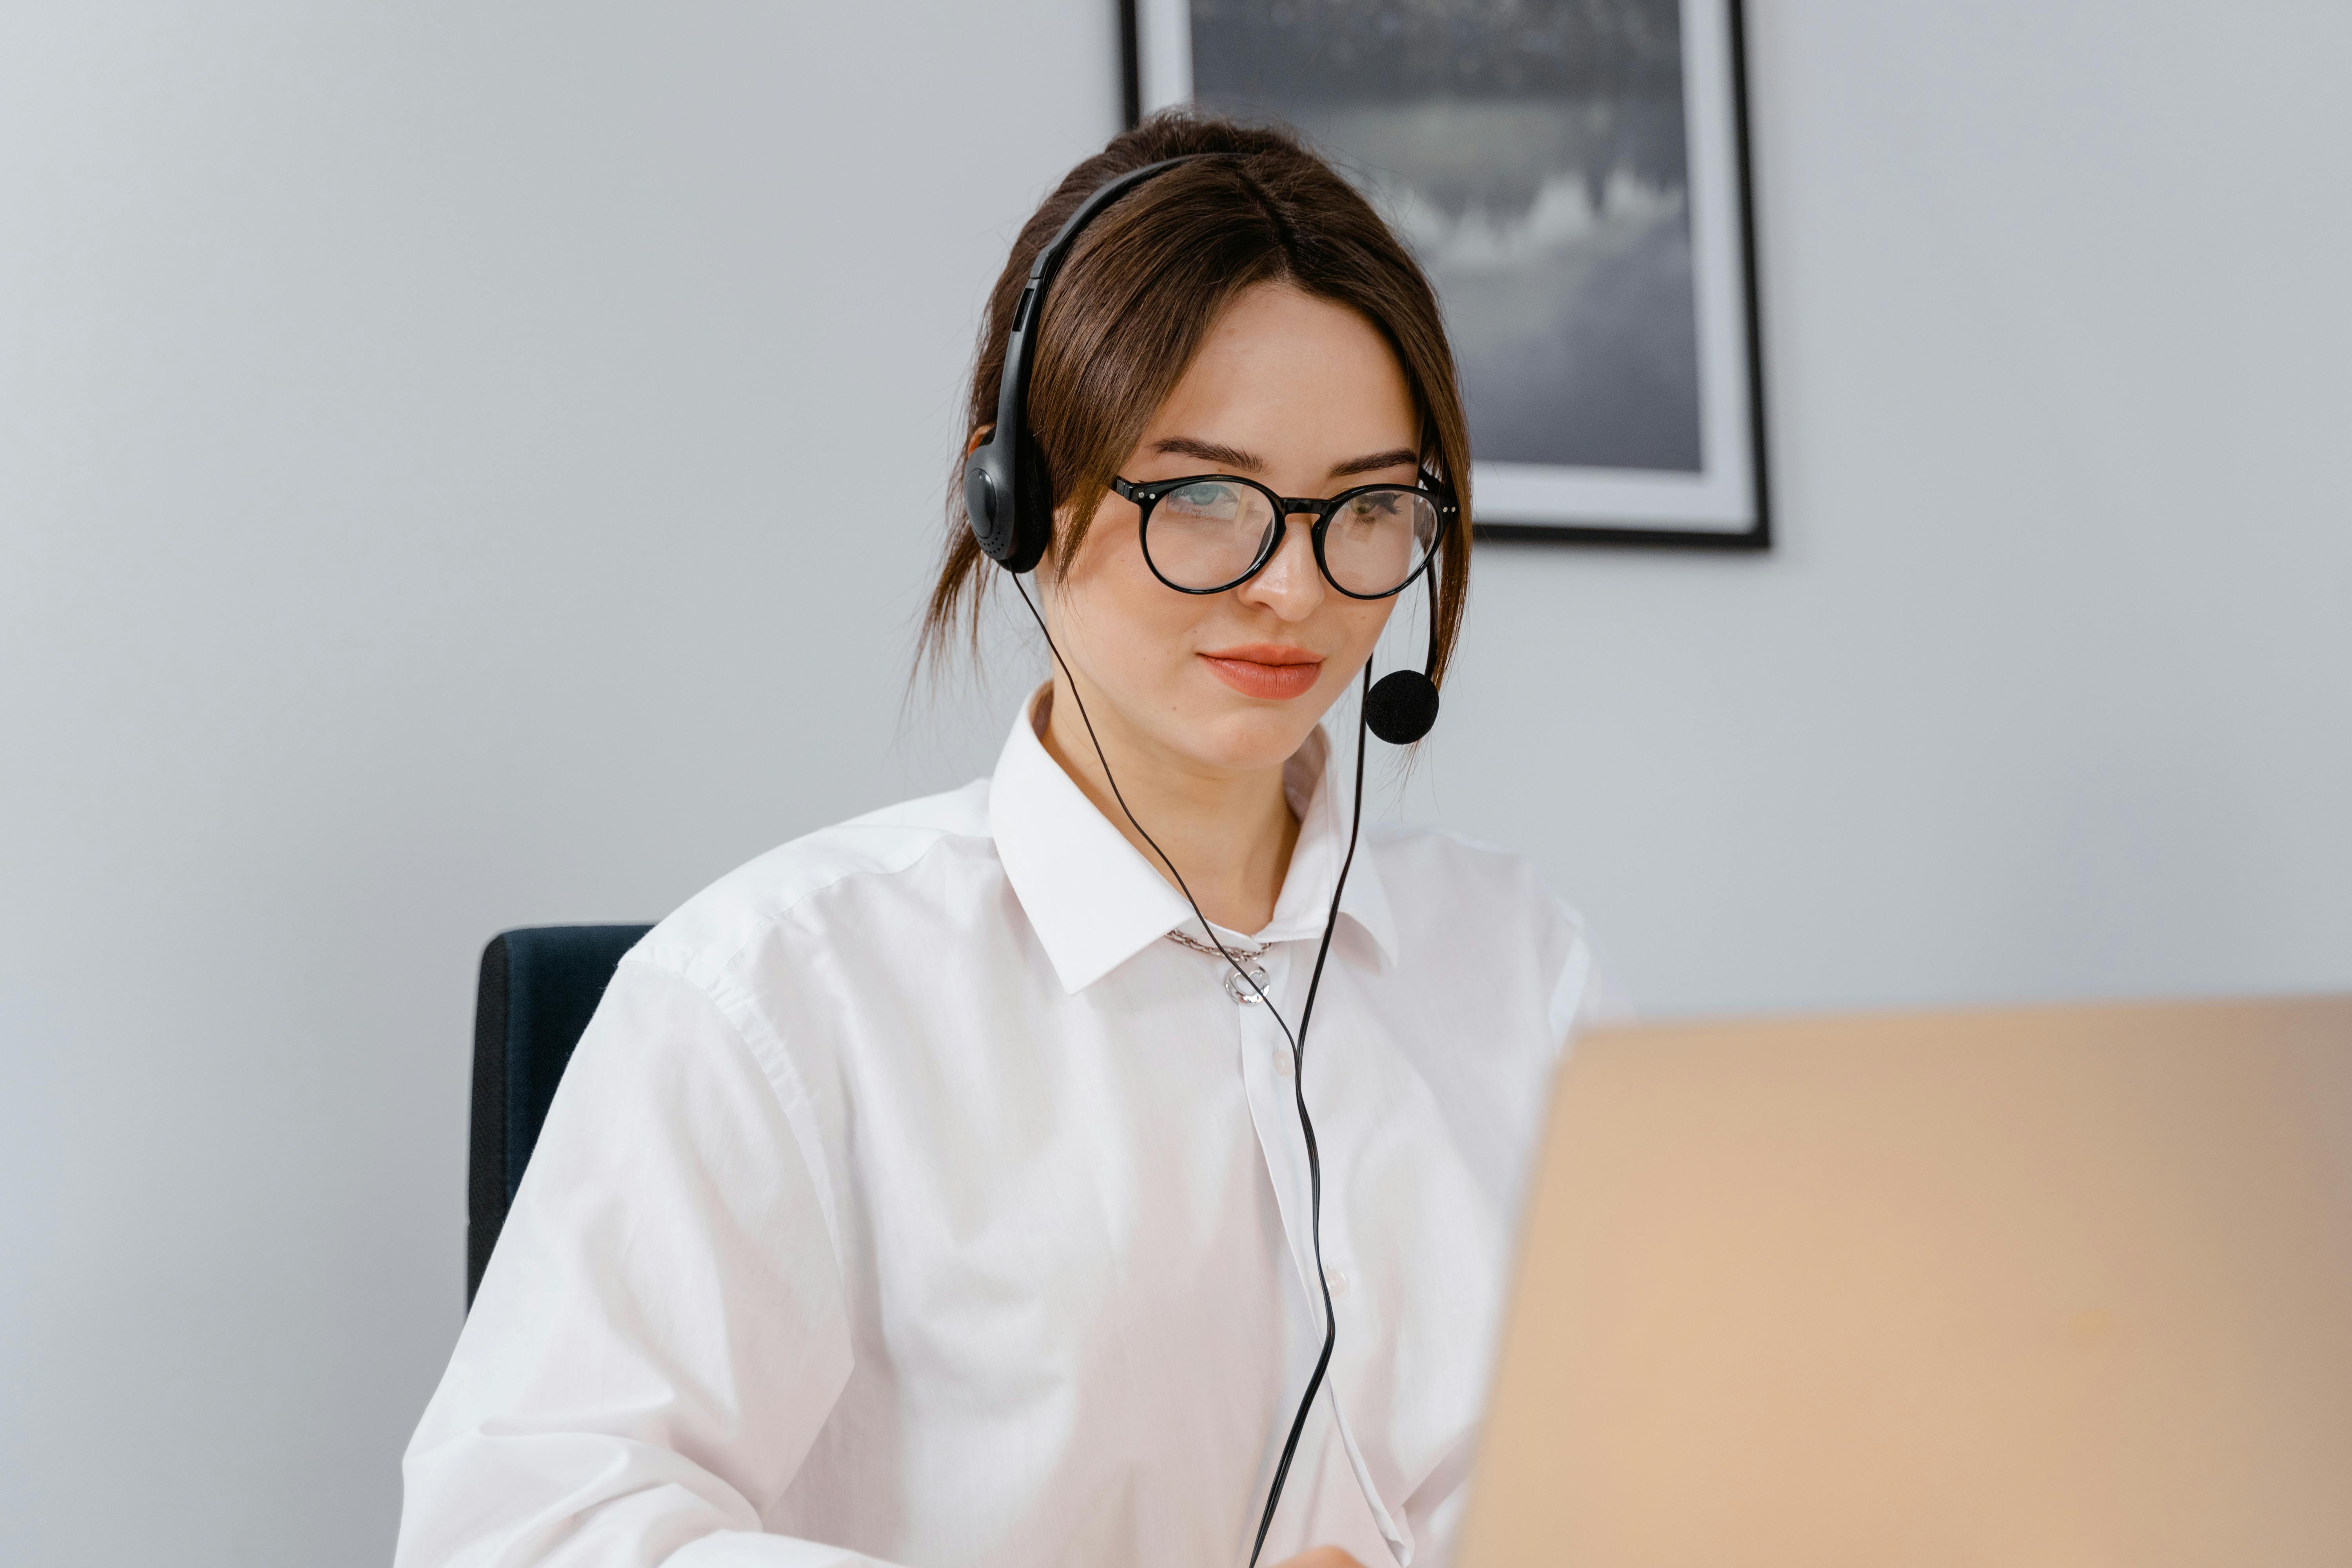 Importance And Benefits Of Live Chat Customer Service